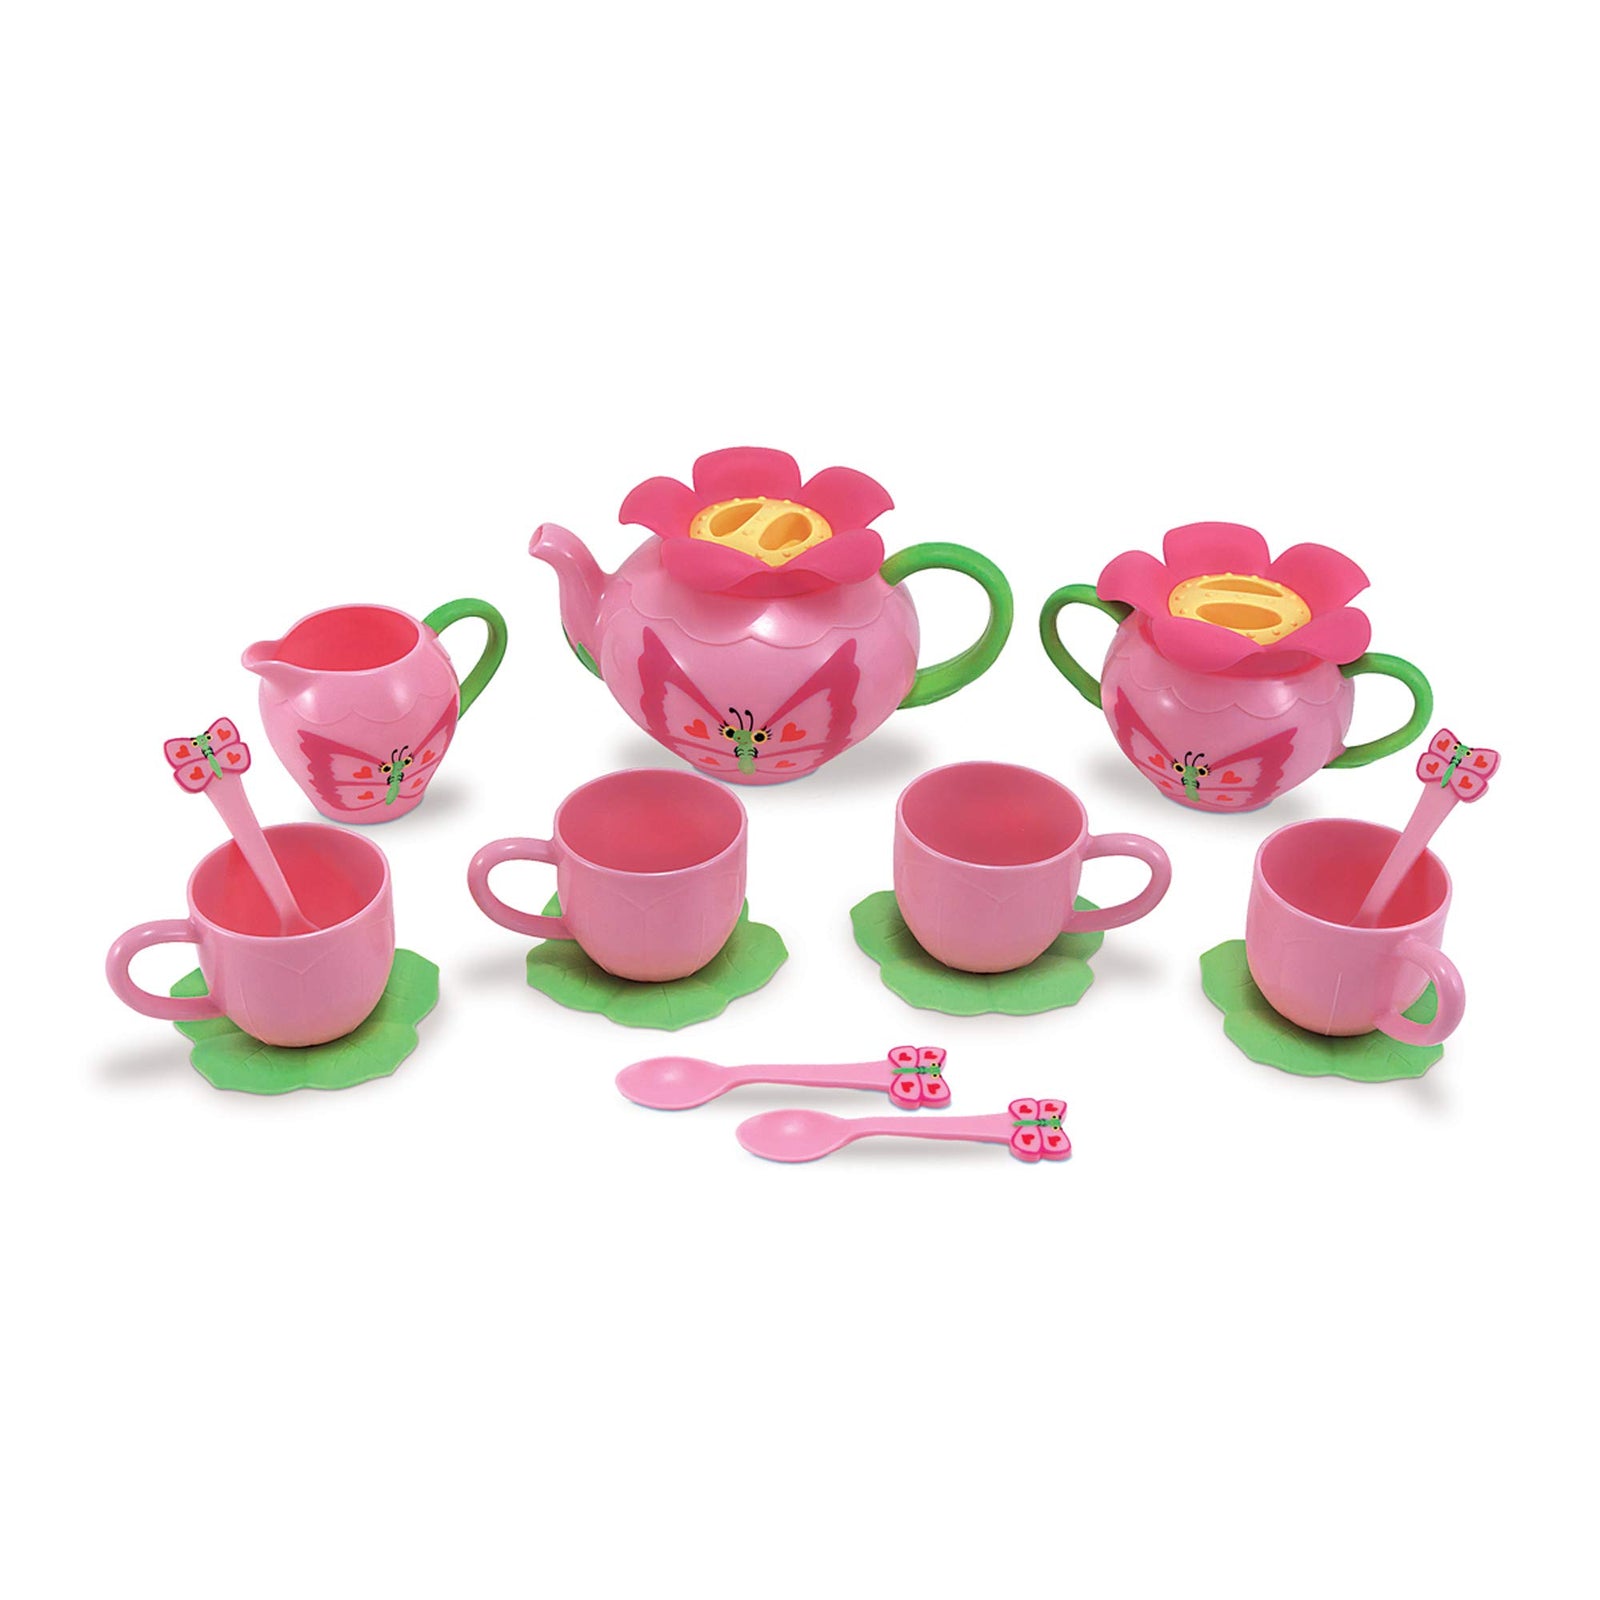 Melissa & Doug Bella Butterfly Pretend Play Tea Set (Pretend Play, Food-Safe Material, BPA-Free, Durable Construction, Frustration-Free Packaging)